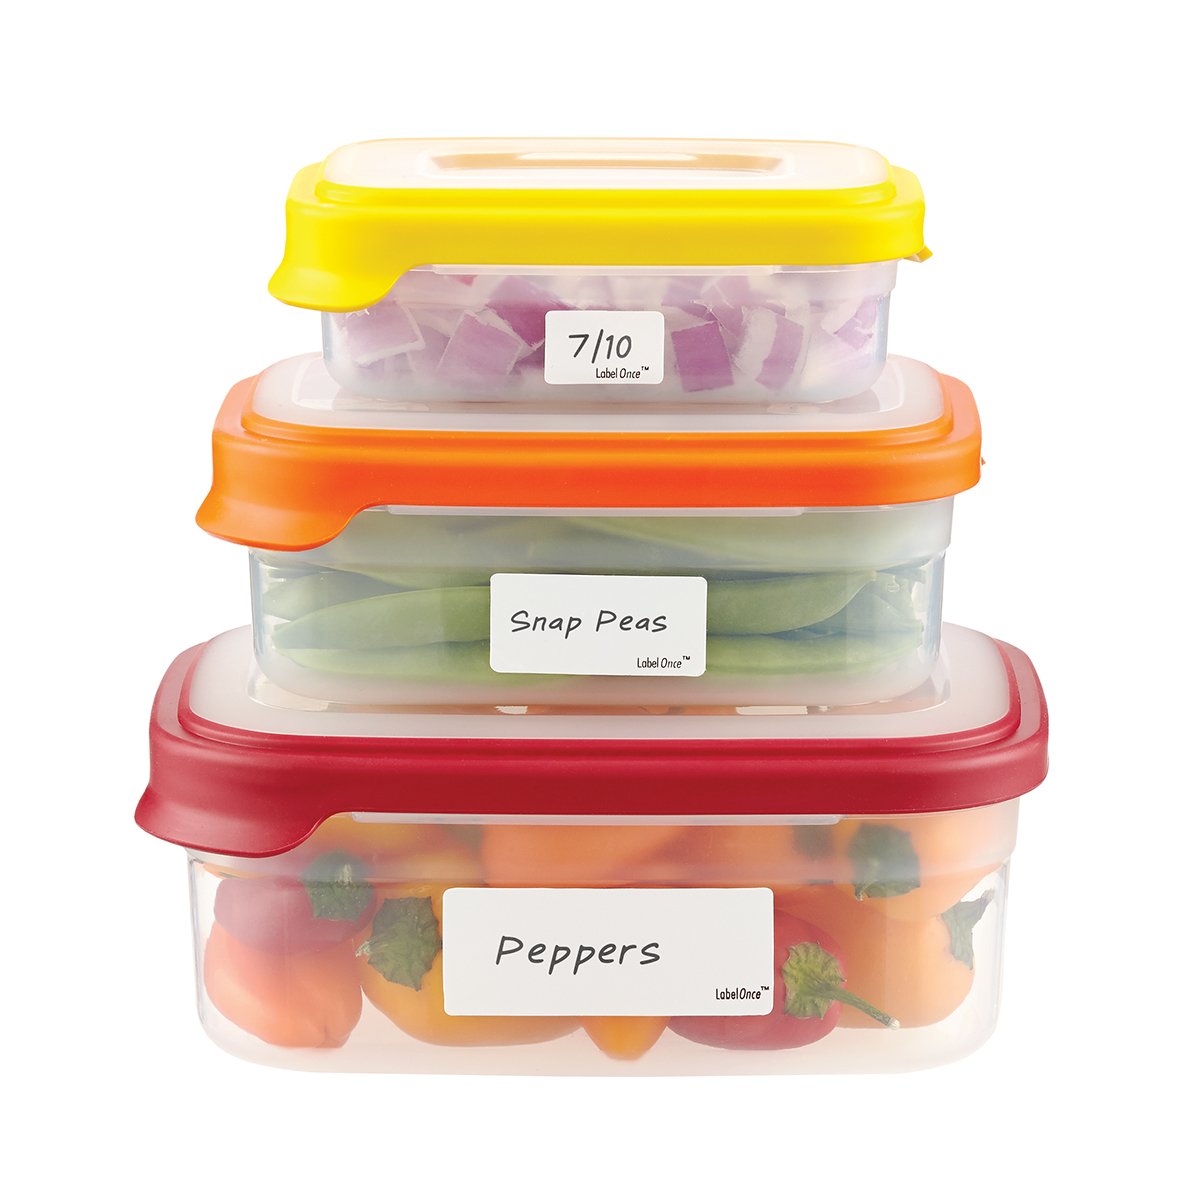 https://www.containerstore.com/catalogimages/419197/454090-FoodLabels-PVL.jpg